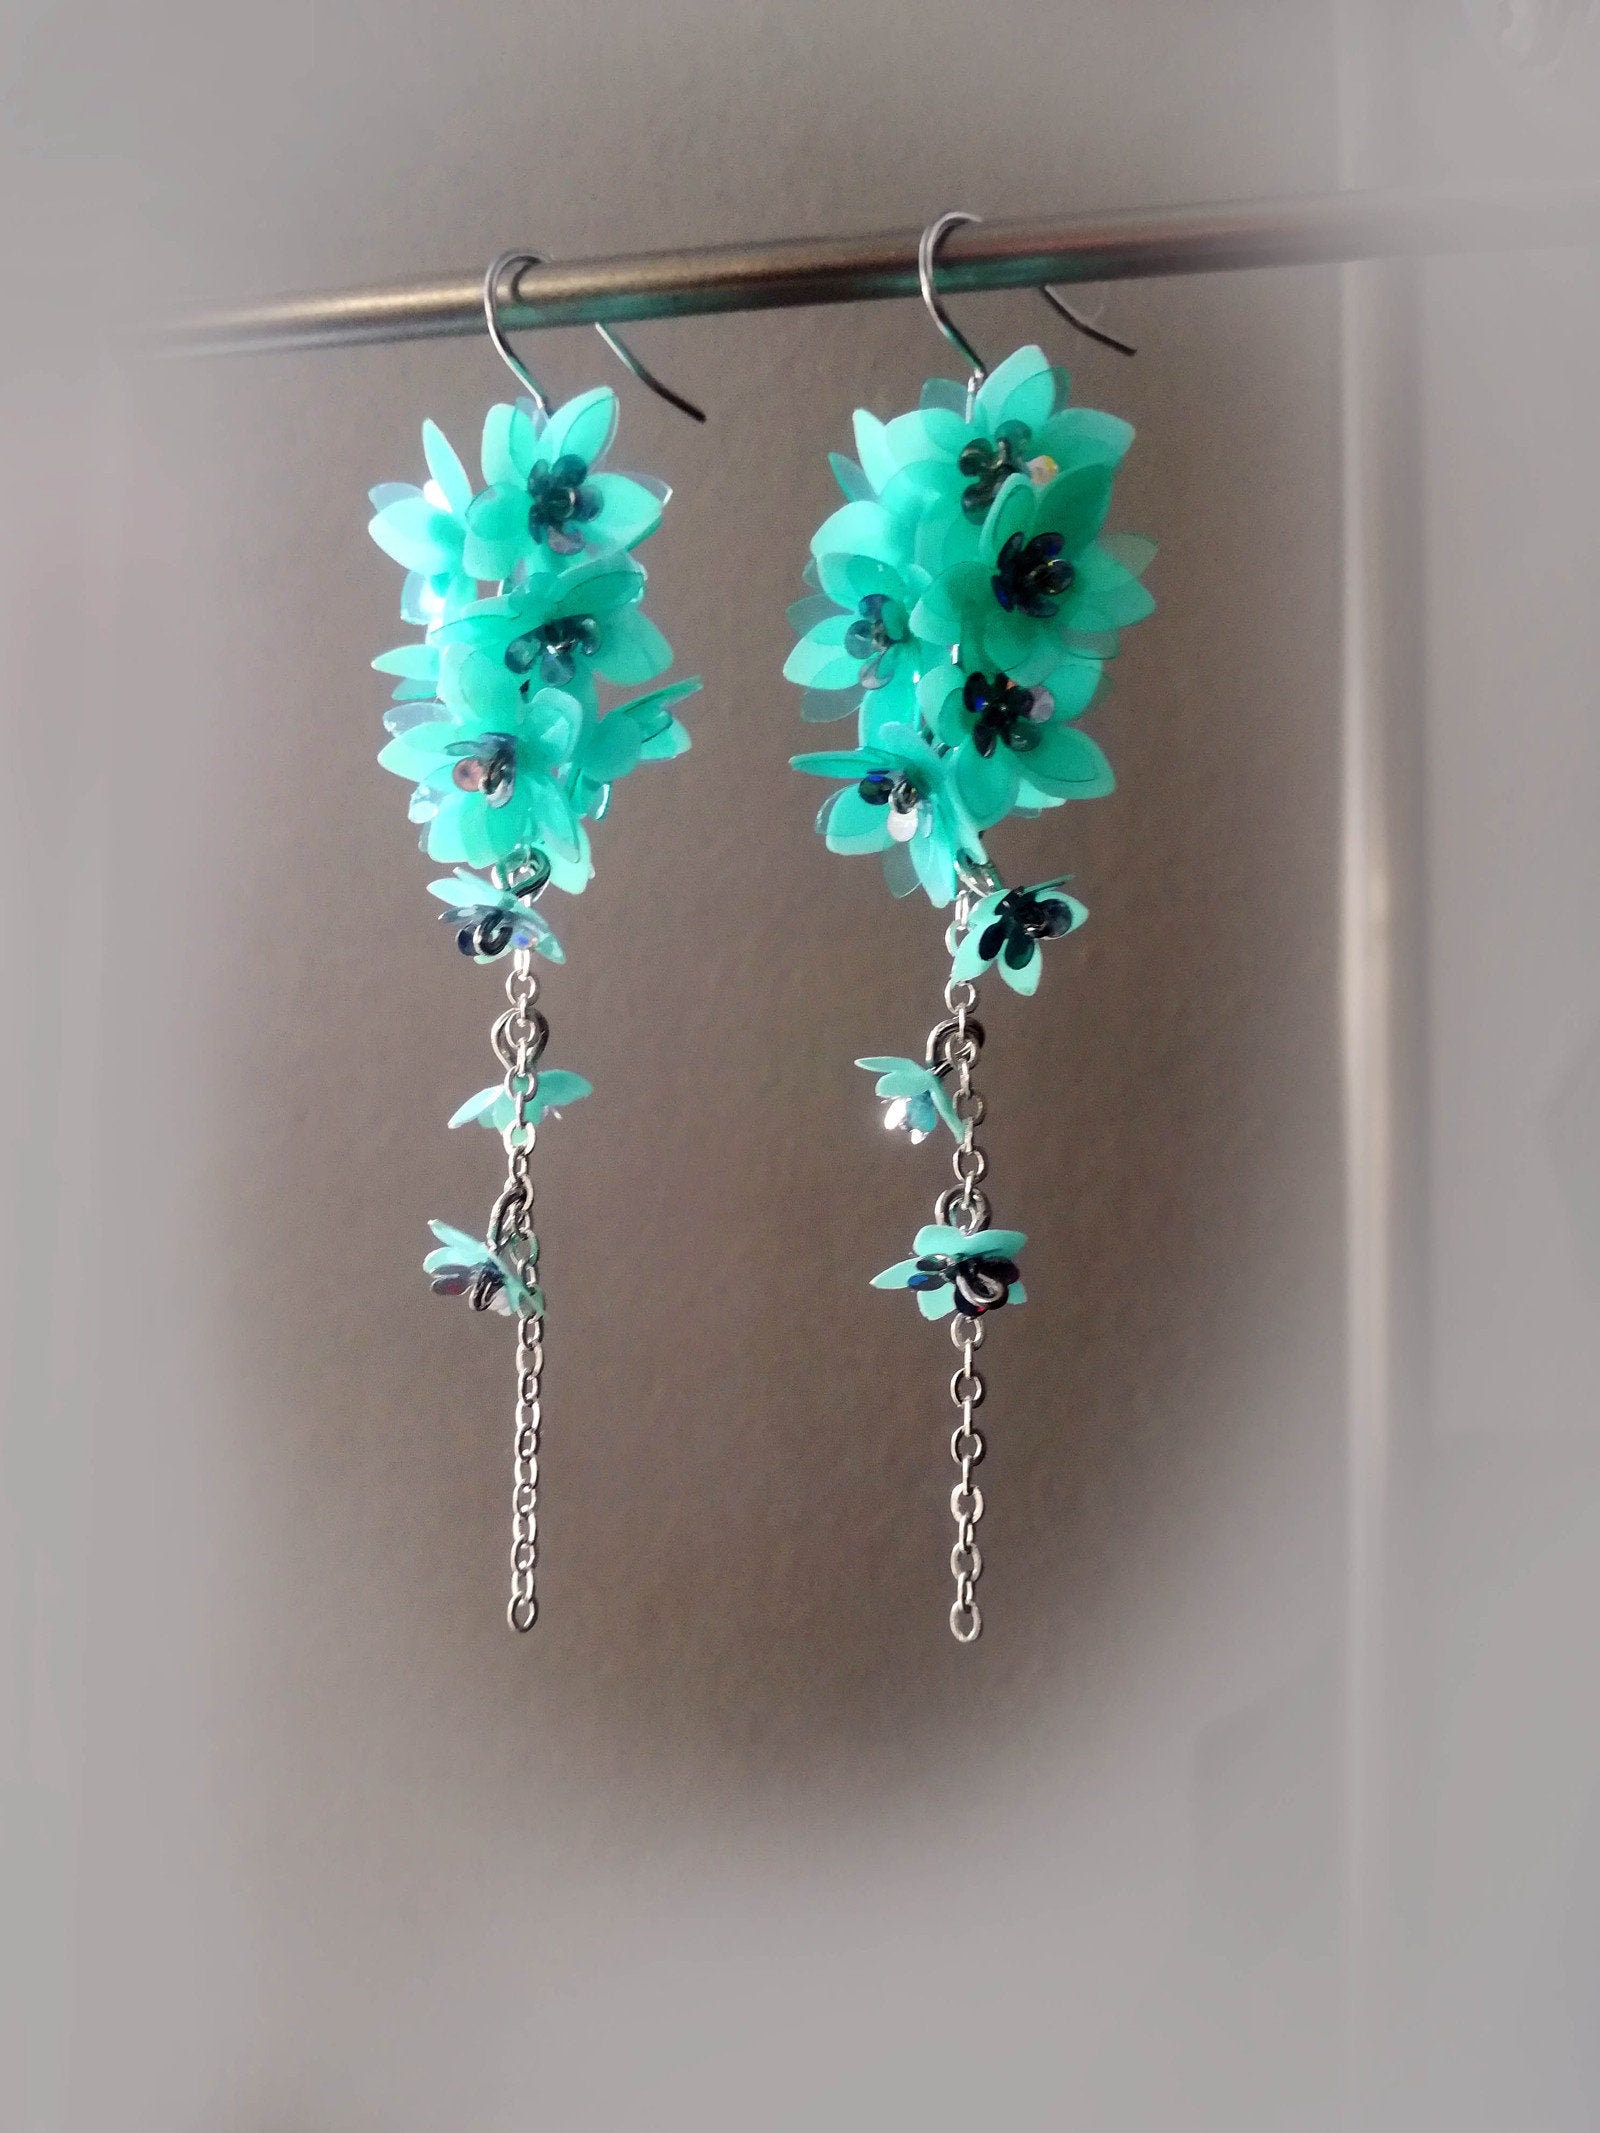 Recycled Plastic EARRINGS, Surgery Steel 316L, Recycled Bottle